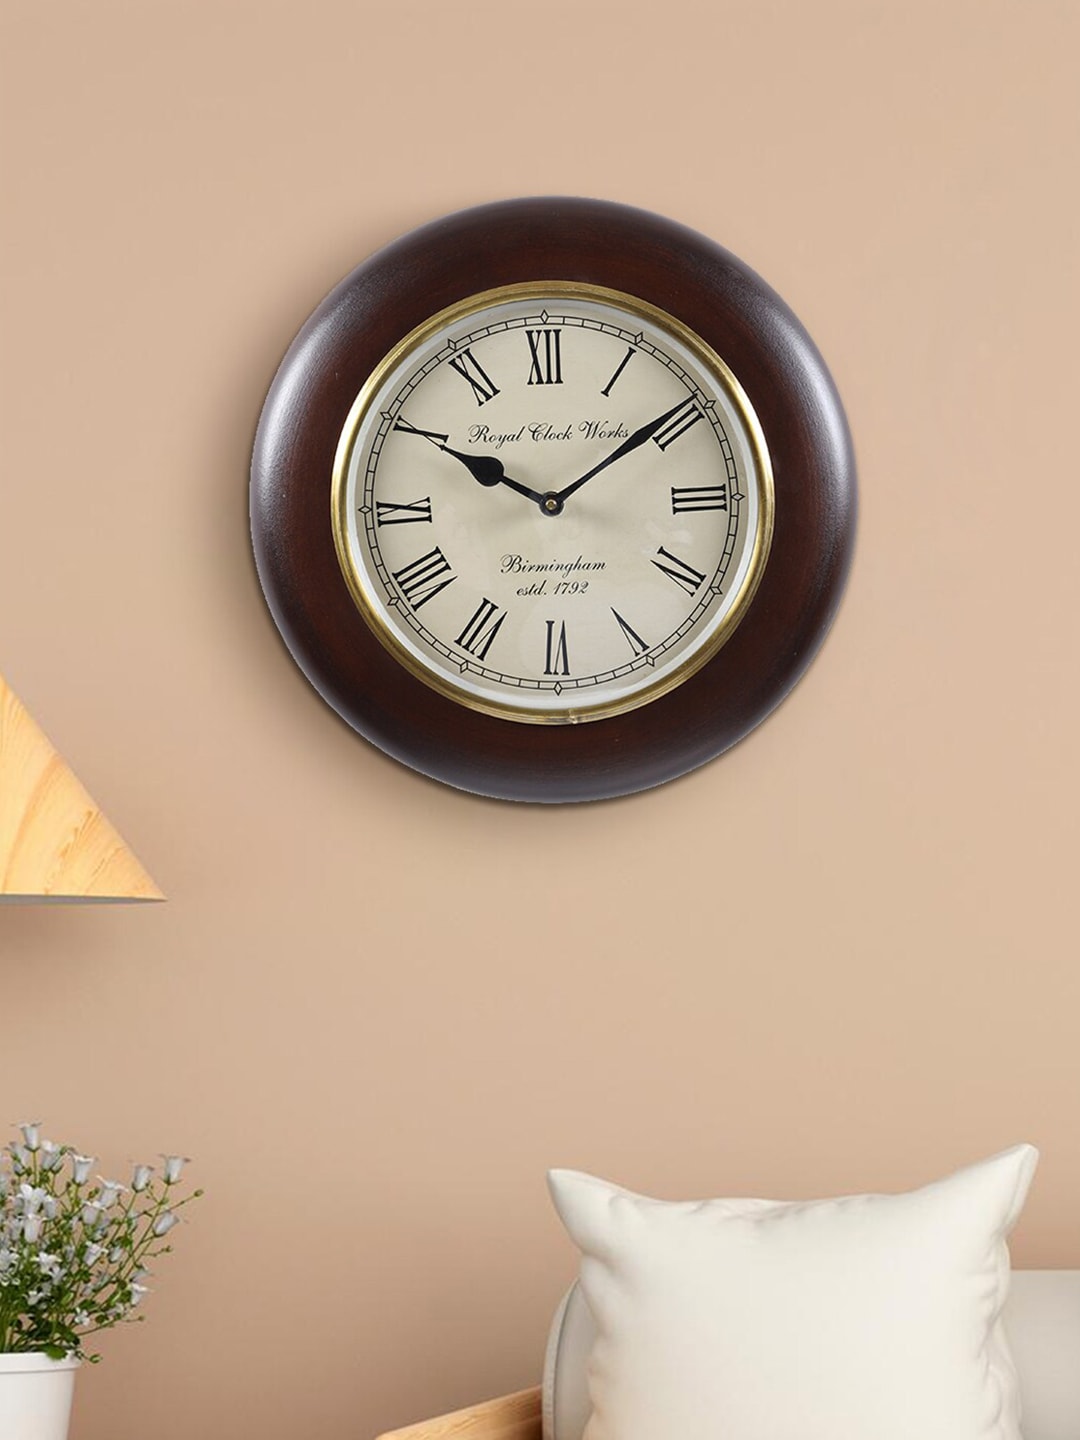 Aapno Rajasthan Brown Round Analogue Wall Clock Price in India